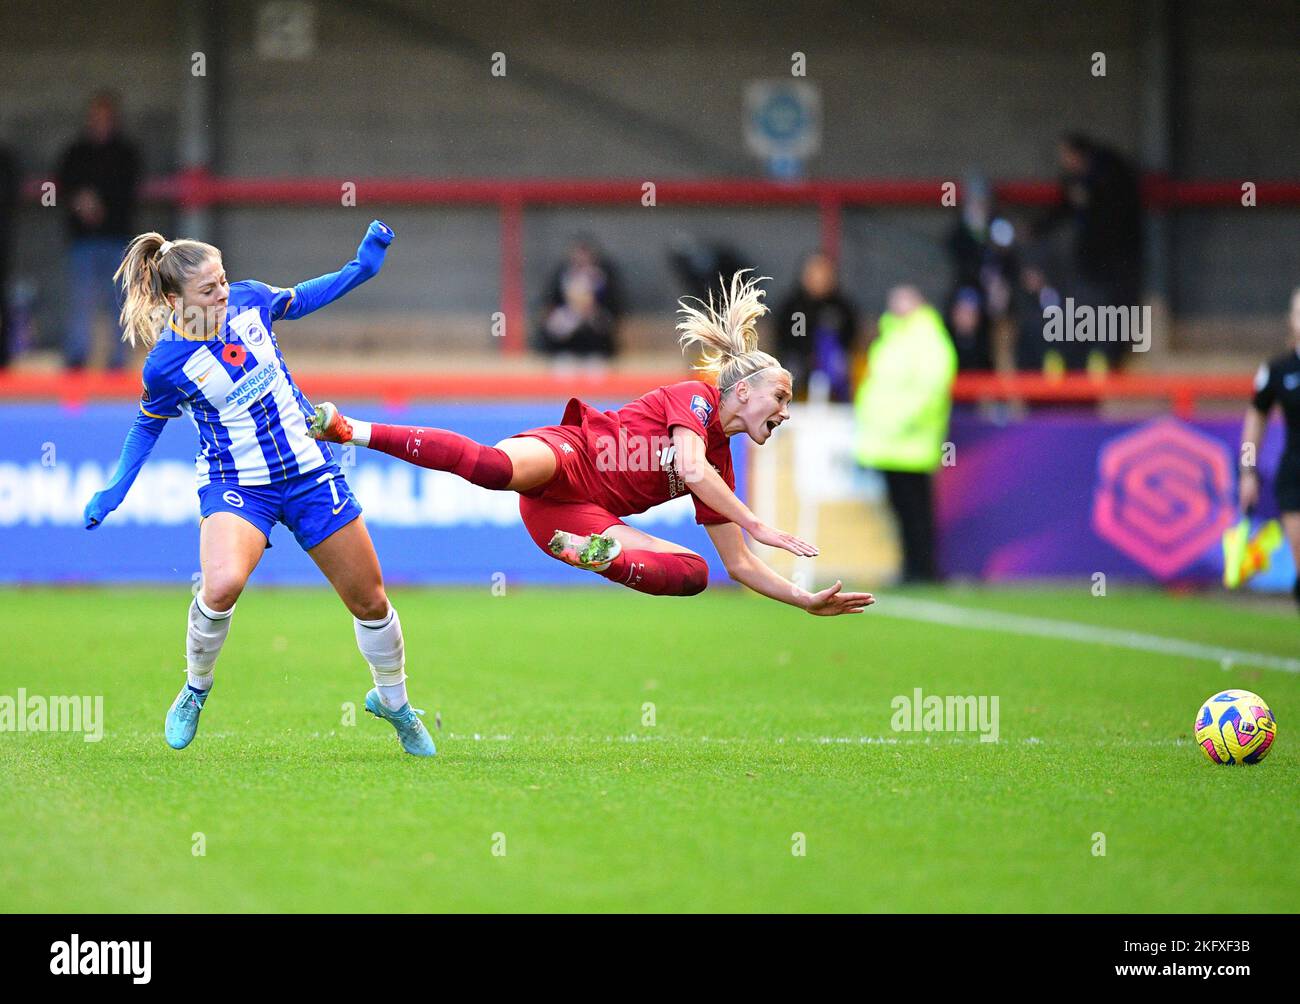 Crawley, UK. 20th Nov, 2022. Emma Koivisto of Liverpool dramatically goes to ground under pressure from Veatriki Sarri of Brighton and Hove Albion during the FA Women's Super League match between Brighton & Hove Albion Women and Liverpool Women at The People's Pension Stadium on November 20th 2022 in Crawley, United Kingdom. (Photo by Jeff Mood/phcimages.com) Credit: PHC Images/Alamy Live News Stock Photo